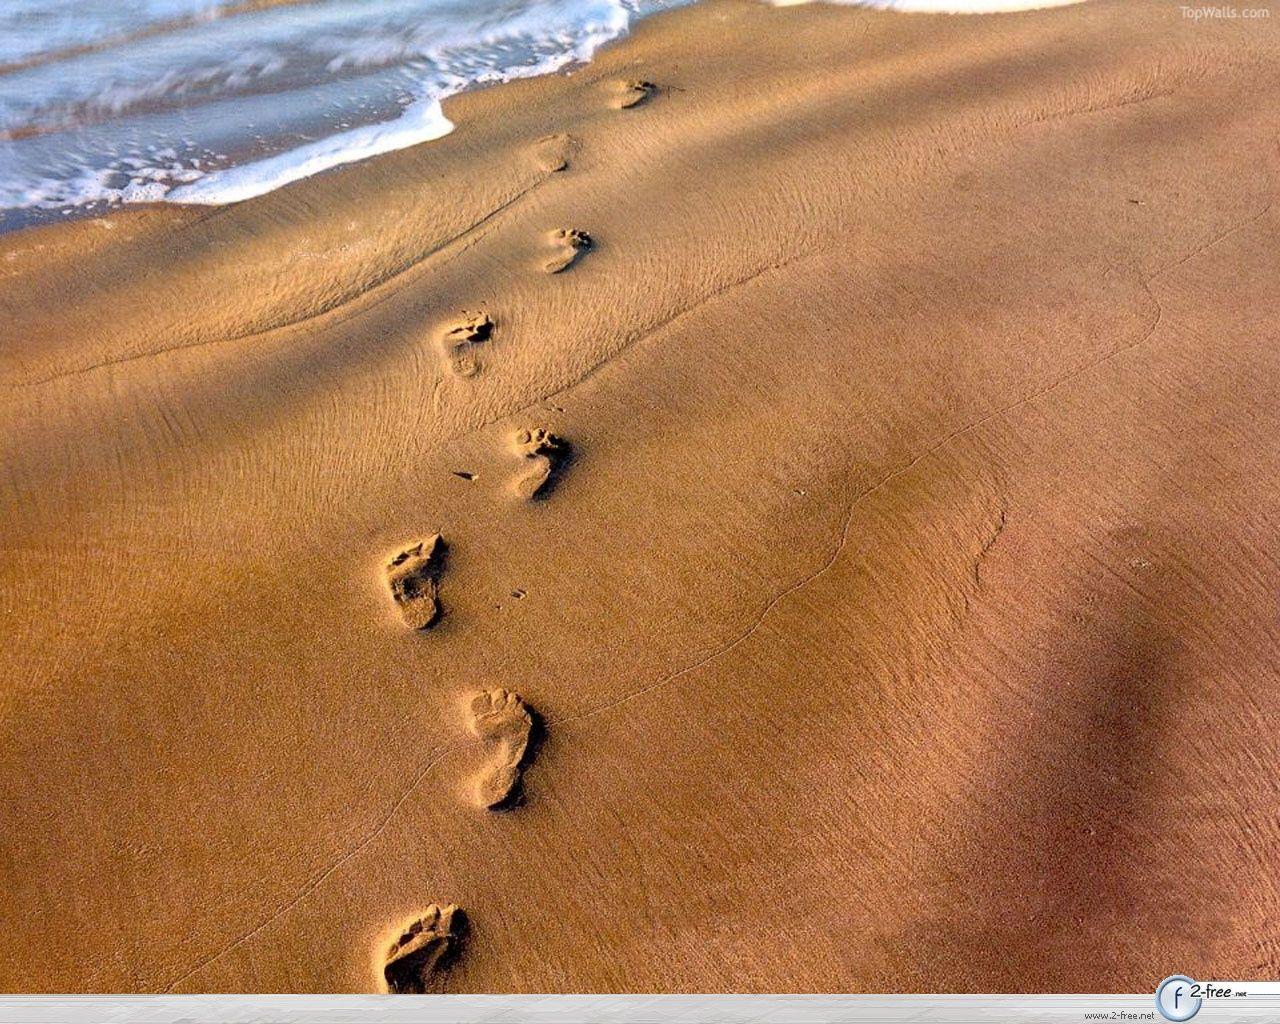 Footprints in the Sand Graphics. Welcome to BoxFont.com